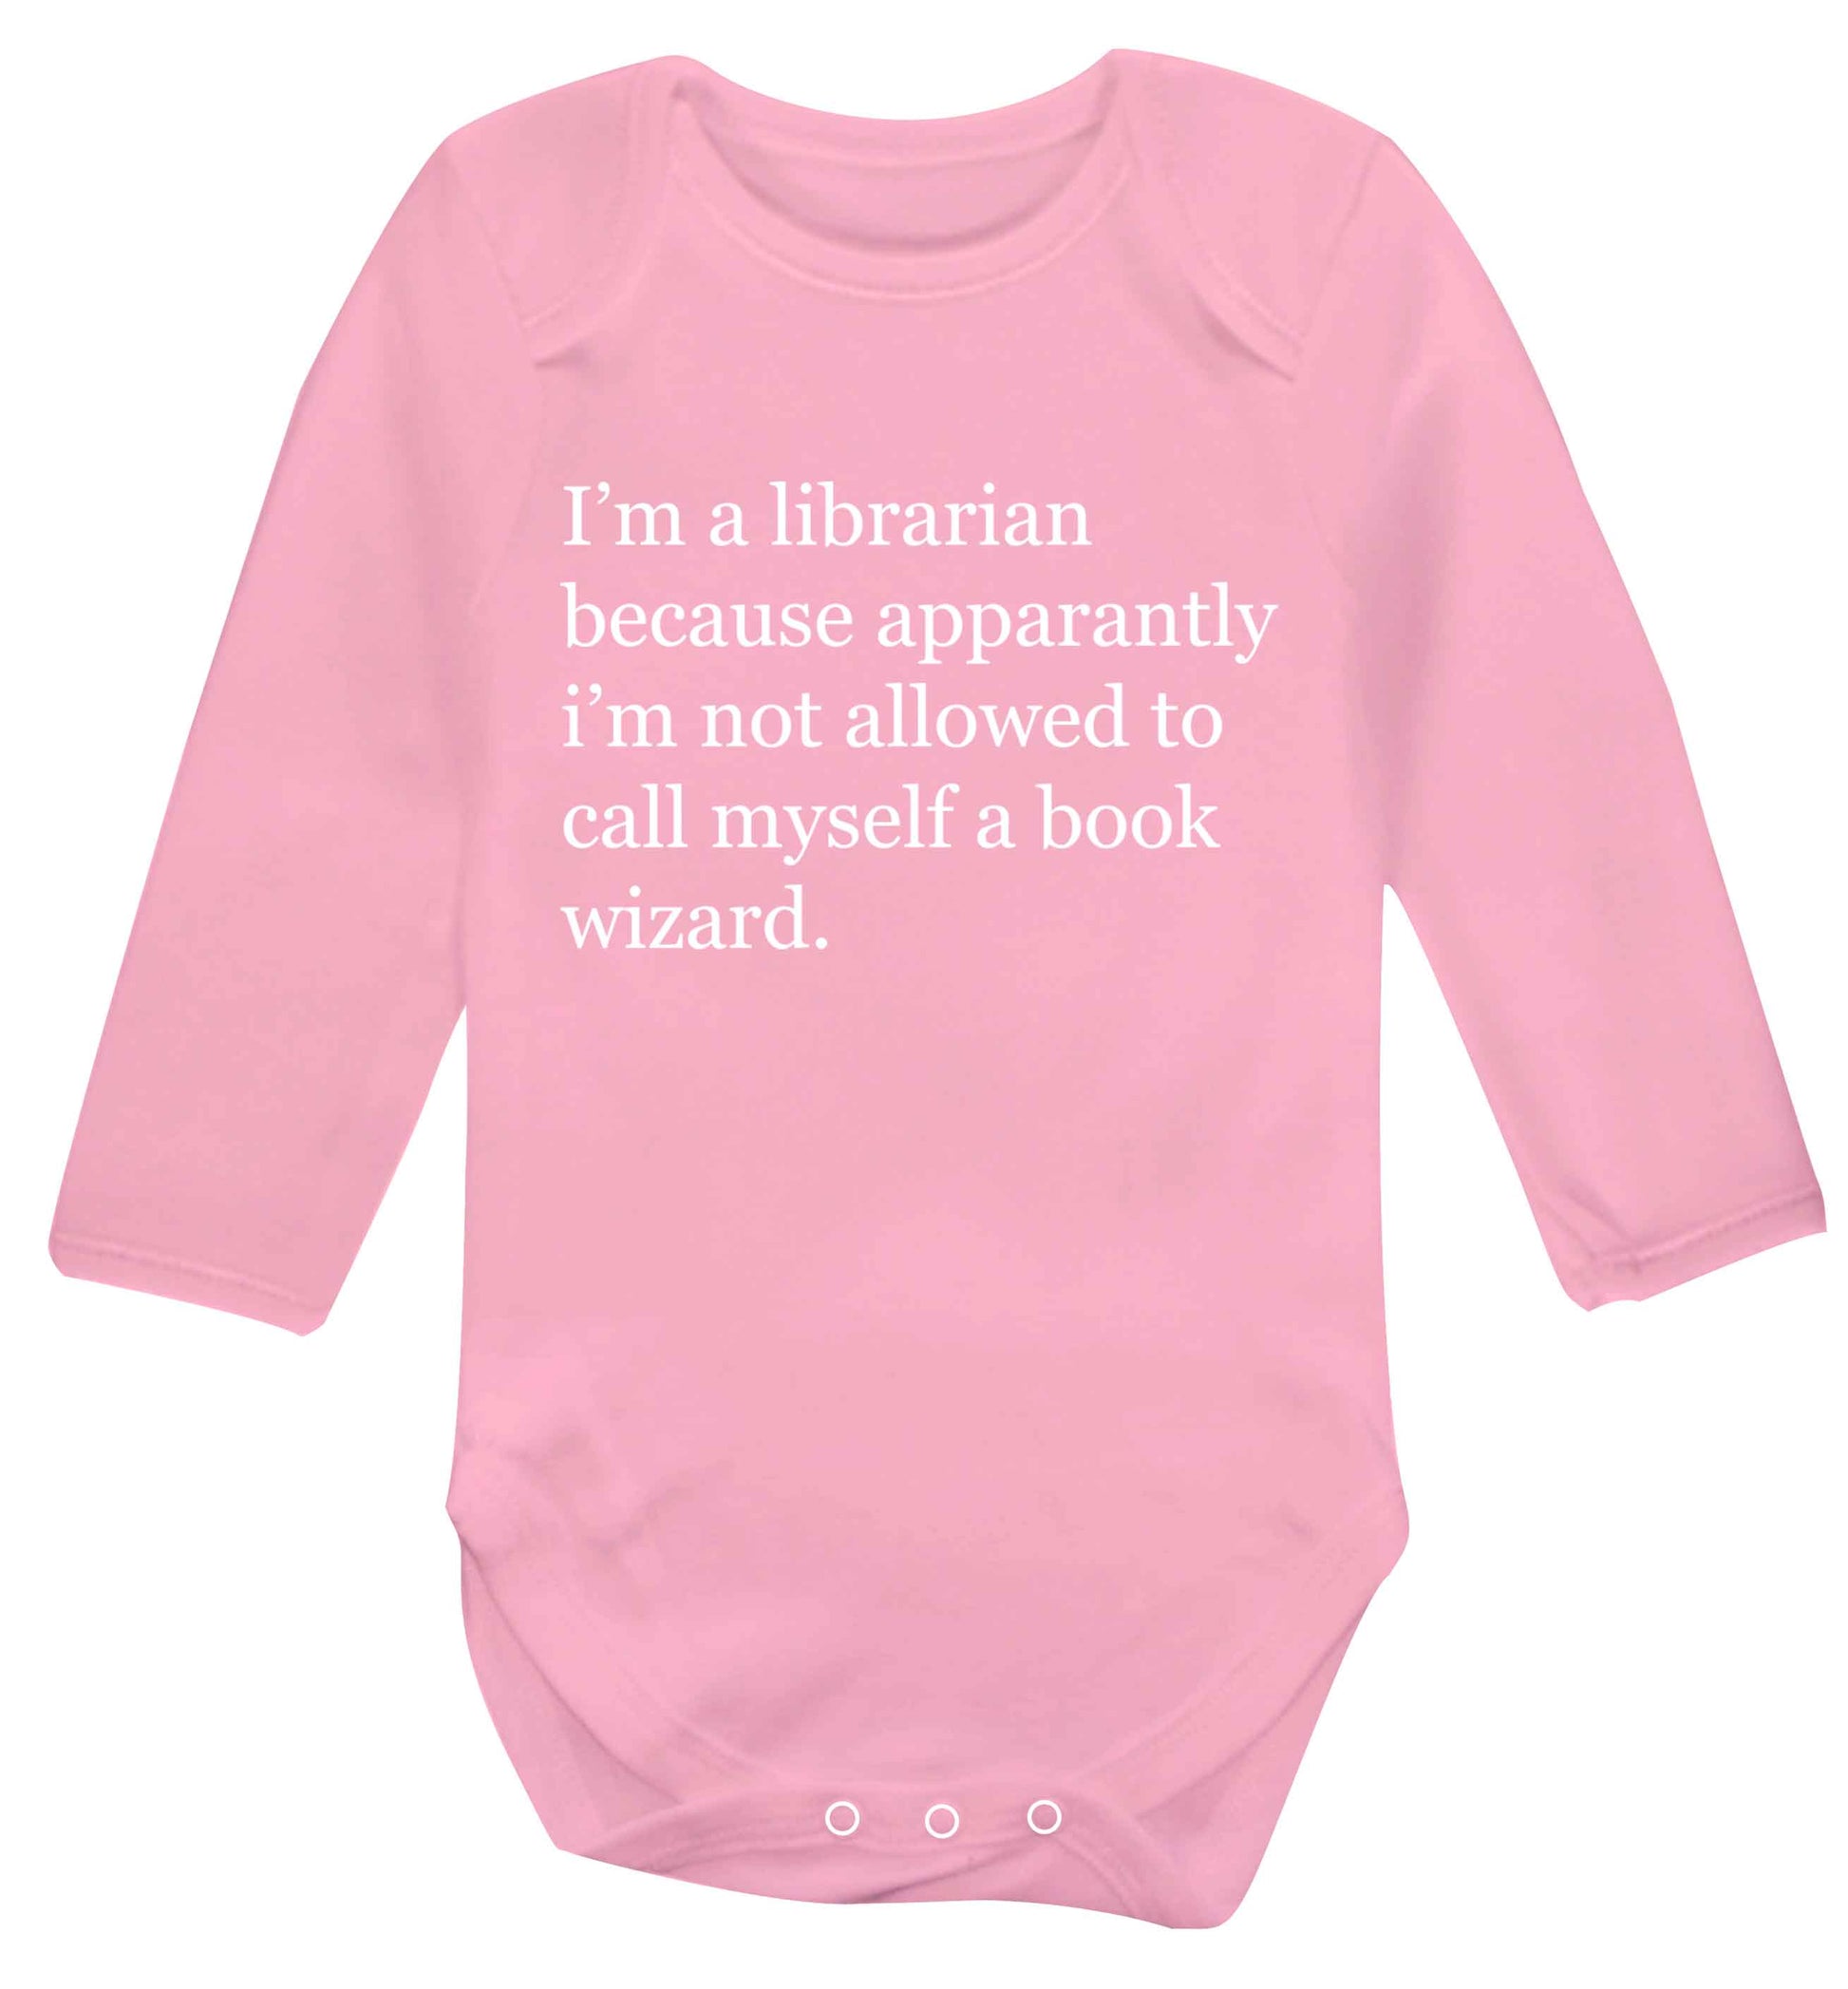 i√ïm a librarian because apparantly i√ïm not allowed to call myself a book wizard Baby Vest long sleeved pale pink 6-12 months